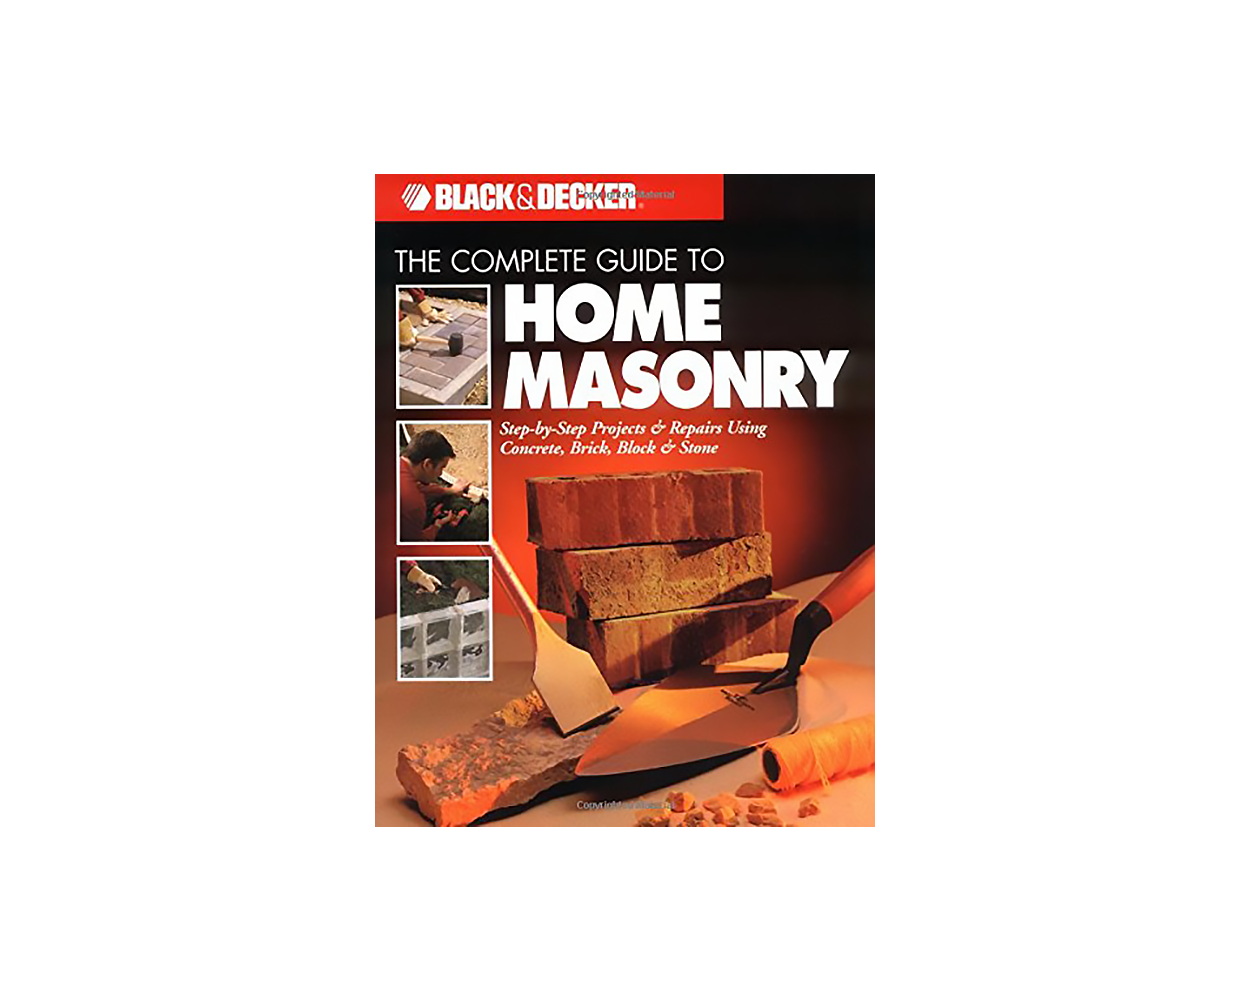 Black & Decker: The Complete Guide to Home Masonry (Black & Decker Home  Improvement Library) by Edit: Builder's Book, Inc.Bookstore